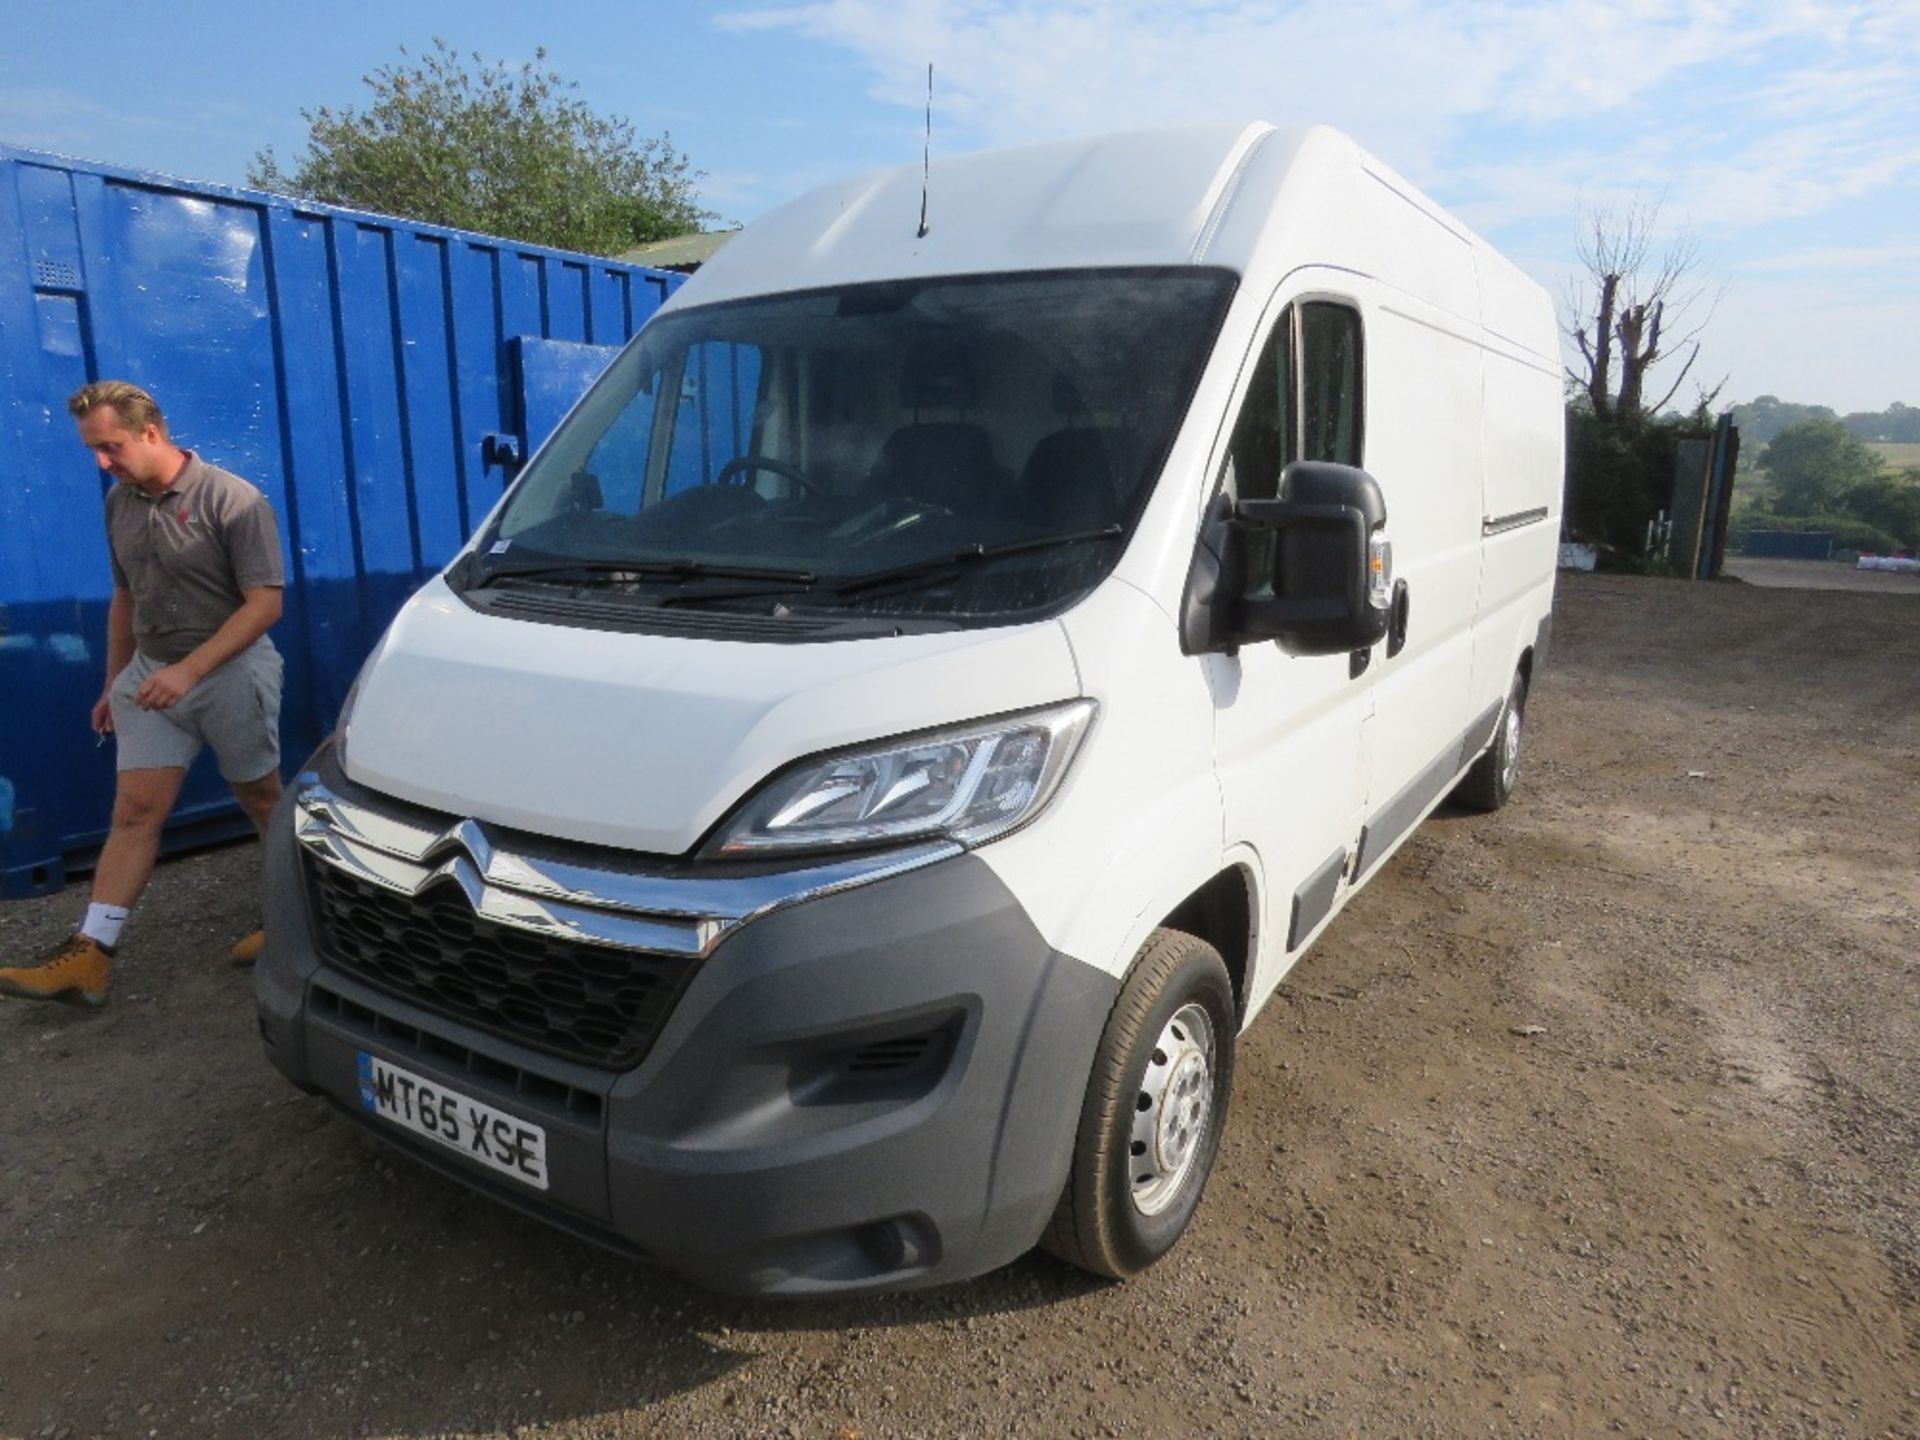 CITROEN RELAY L3 LWB PANEL VAN REG:MT65 XSE. WITH V5 AND MOT UNTIL FEBRUARY 2024. AIR CON. SOURCED F - Image 2 of 16